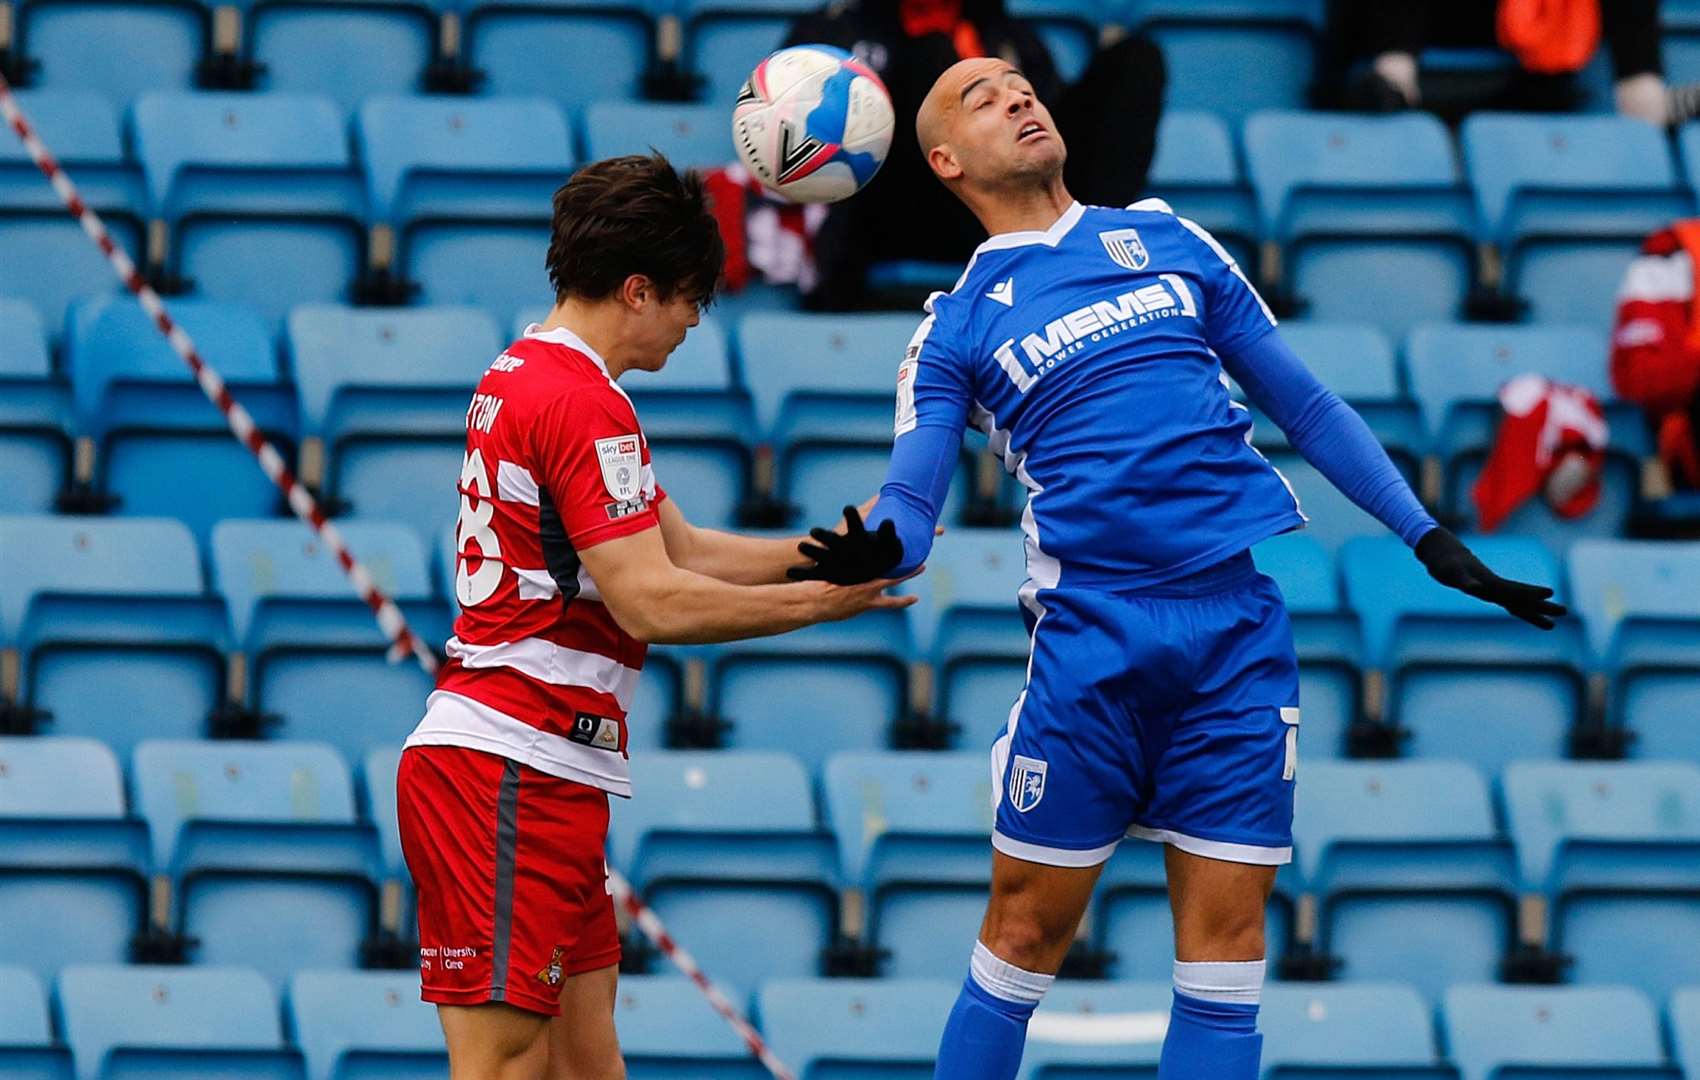 Gillingham's Jordan Graham competes in the air on Saturday. Picture: Andy Jones (45336066)